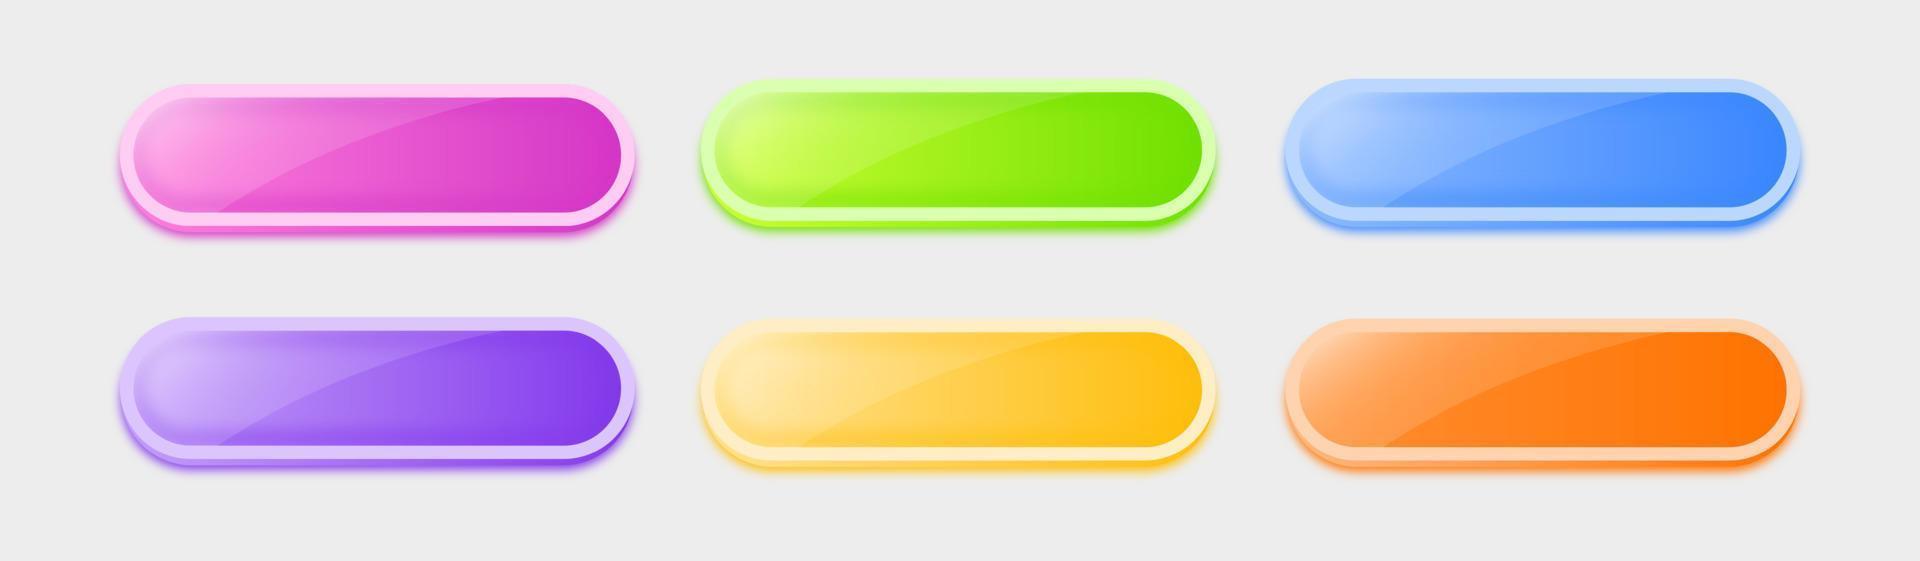 Set of colorful rectangle shape buttons. Different colorful button set. Vector illustration.